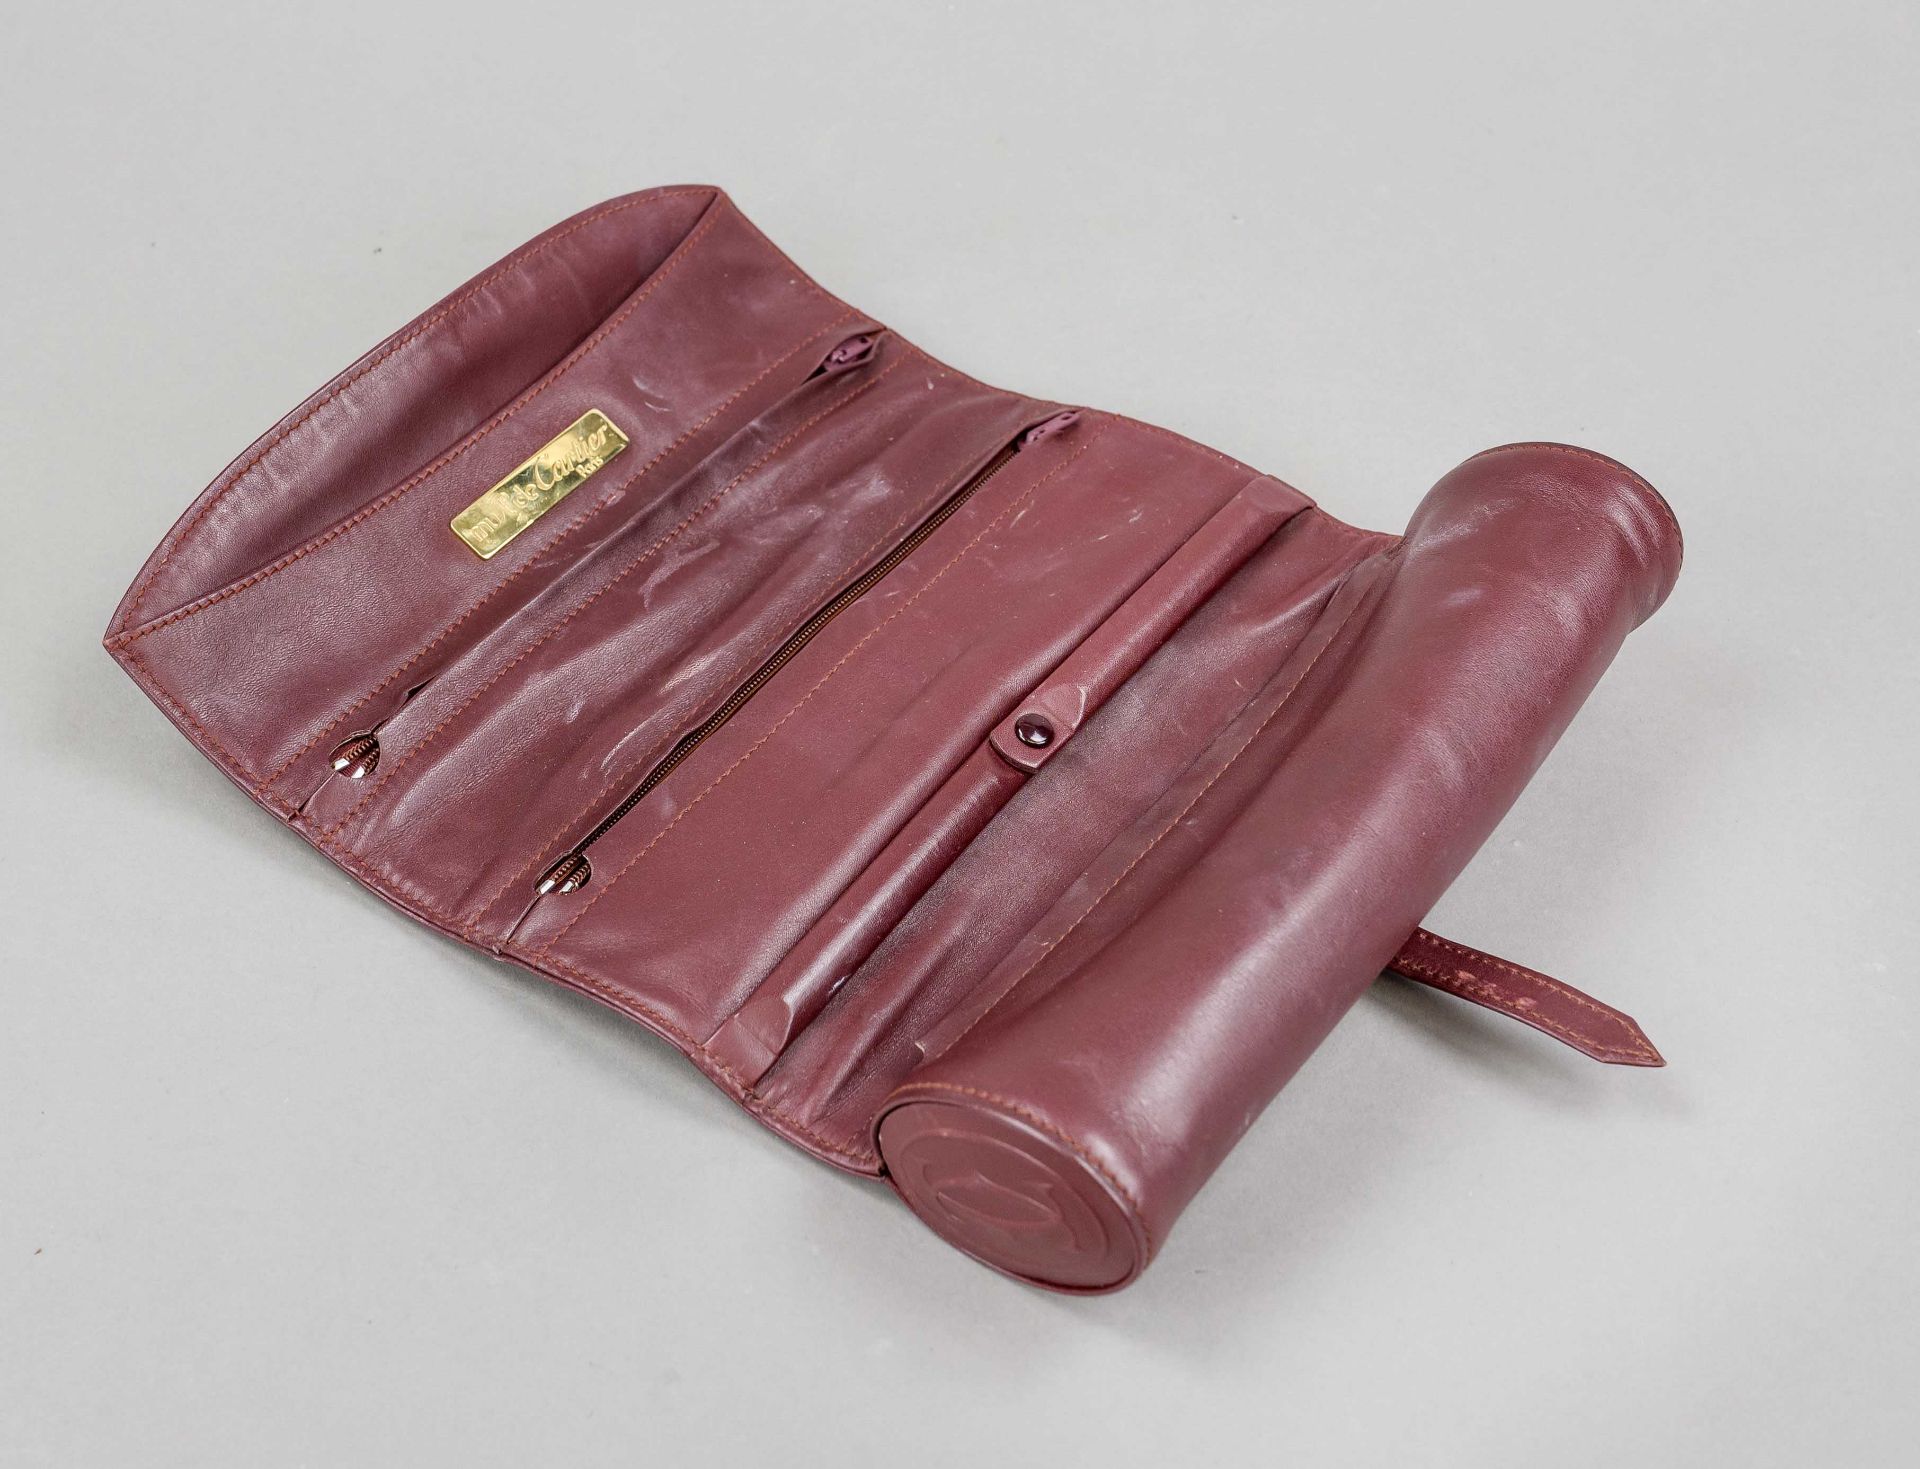 Cartier, leather case (travel case for jewelry?), burgundy smooth leather, gold-coloured hardware, - Image 2 of 2